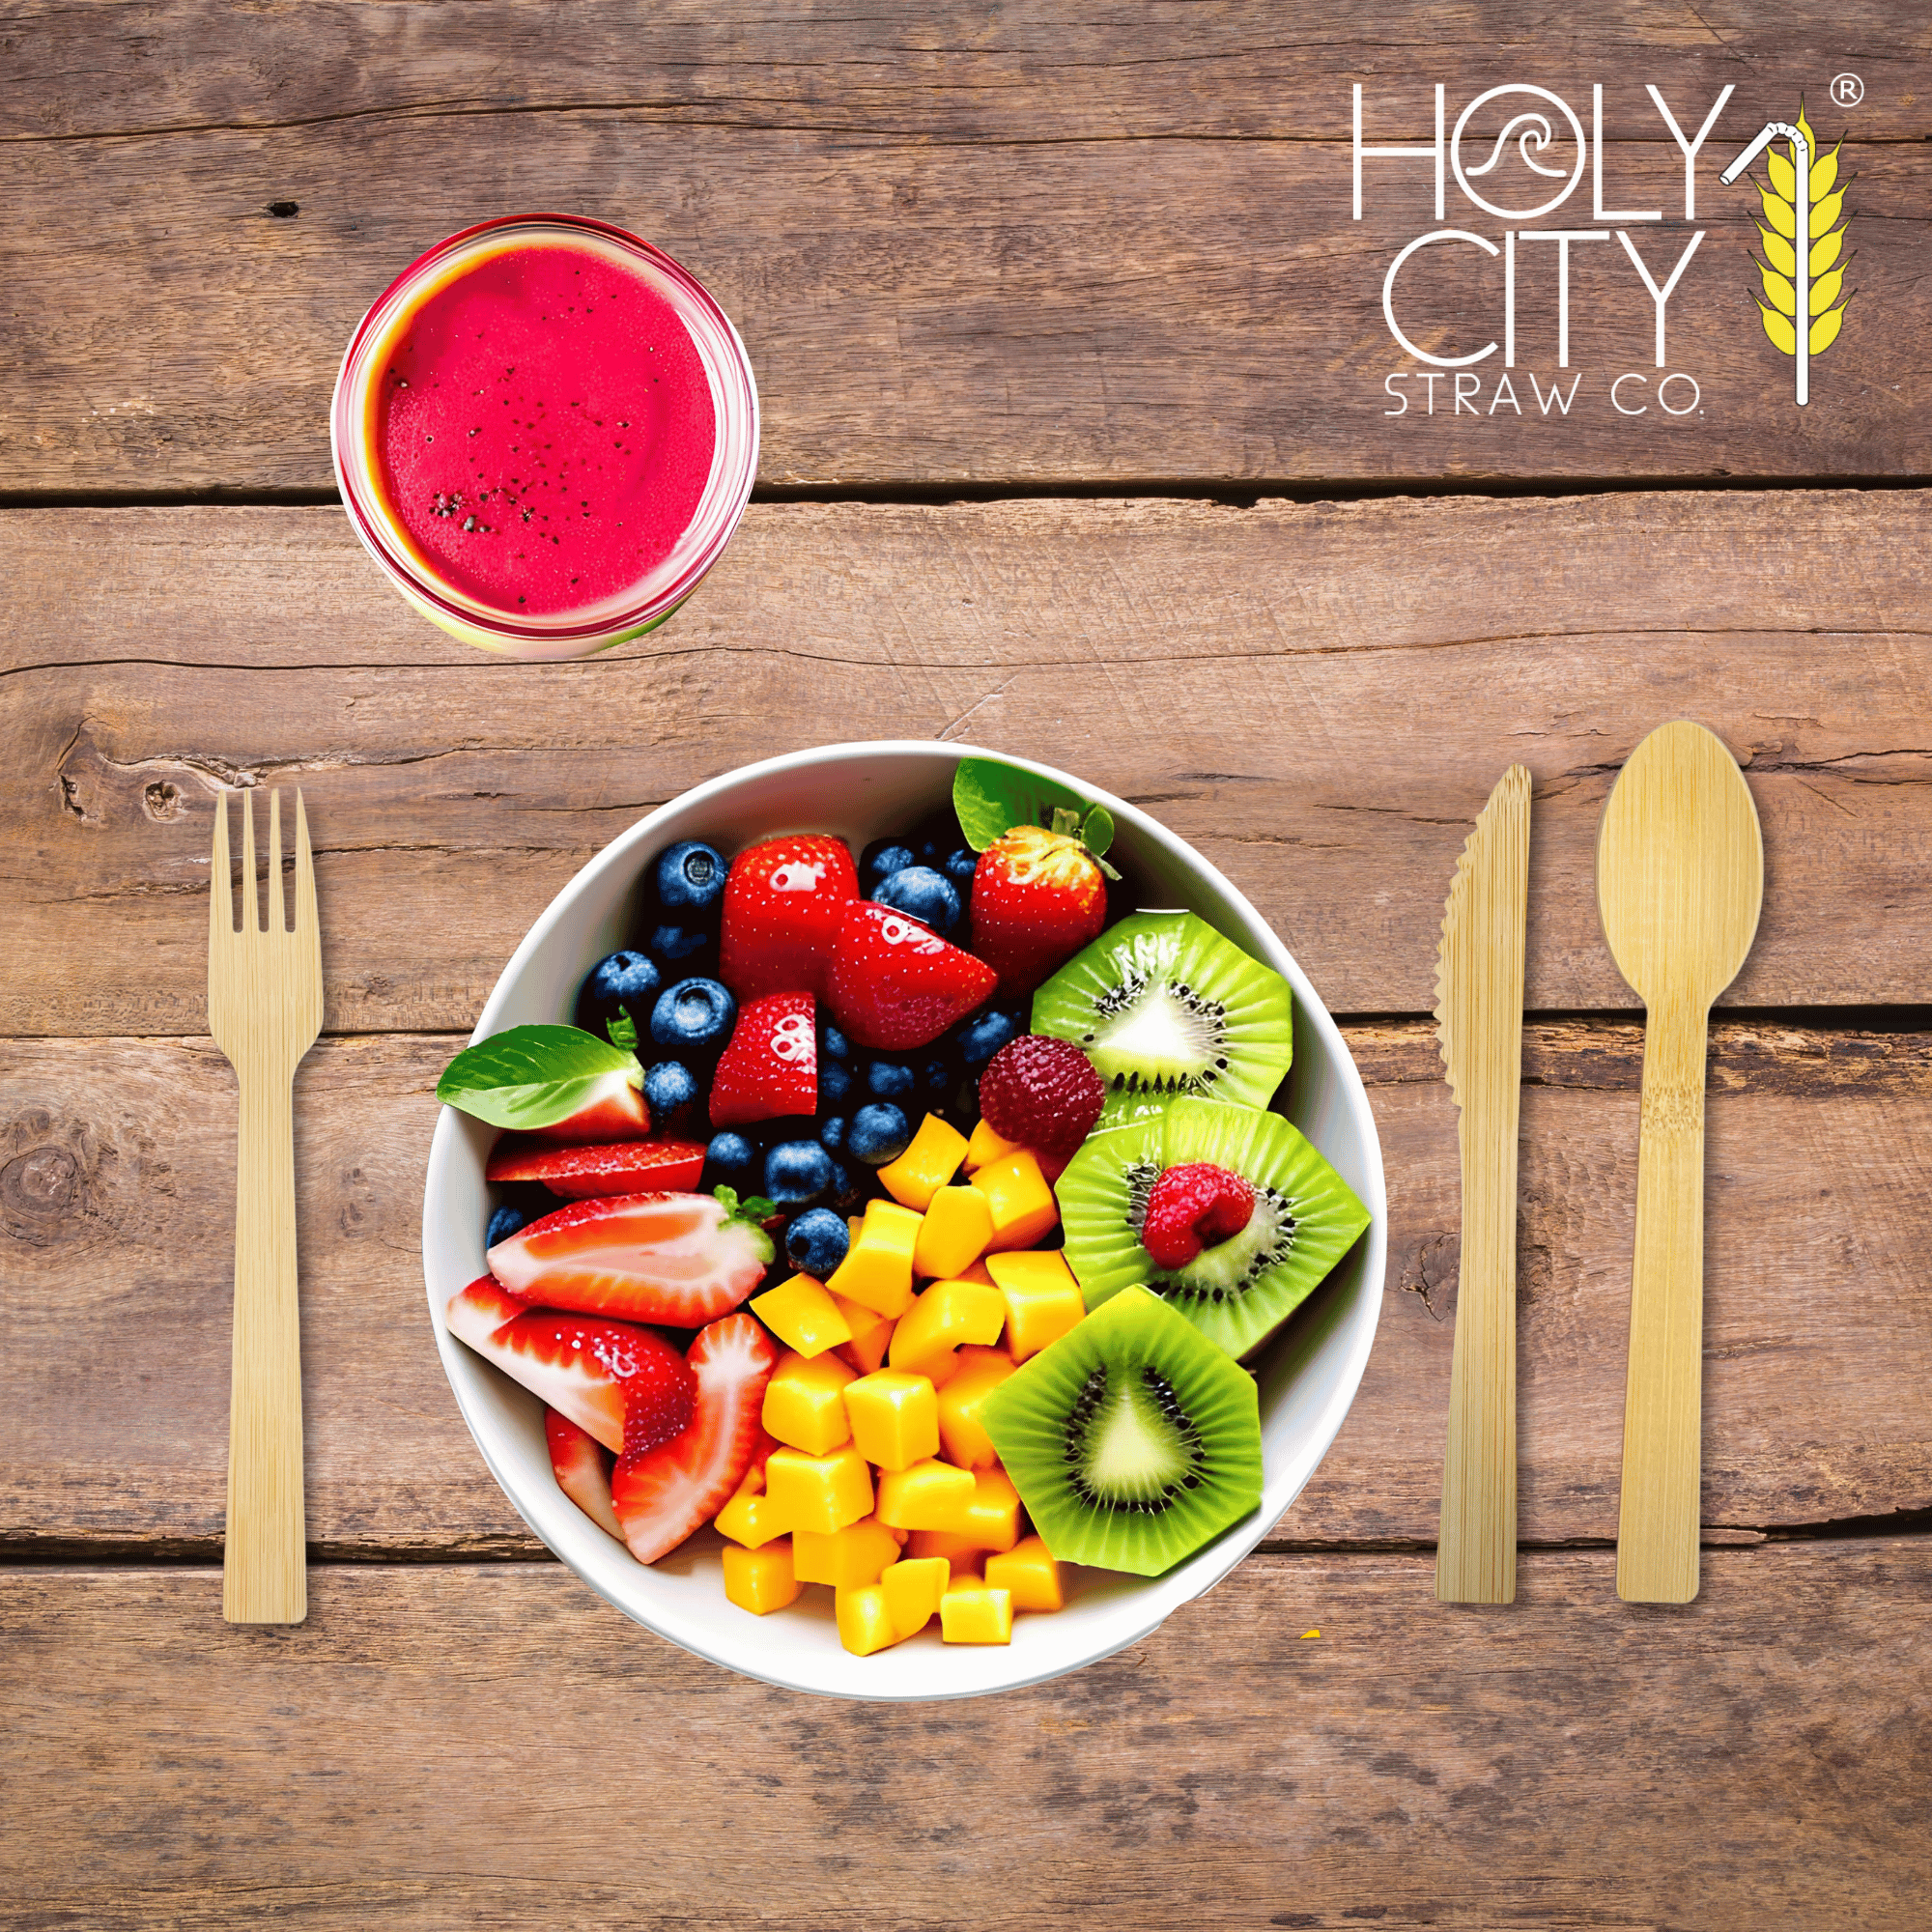 Holy City Straw Co. unwrapped bamboo cutlery next to color fruit place setting